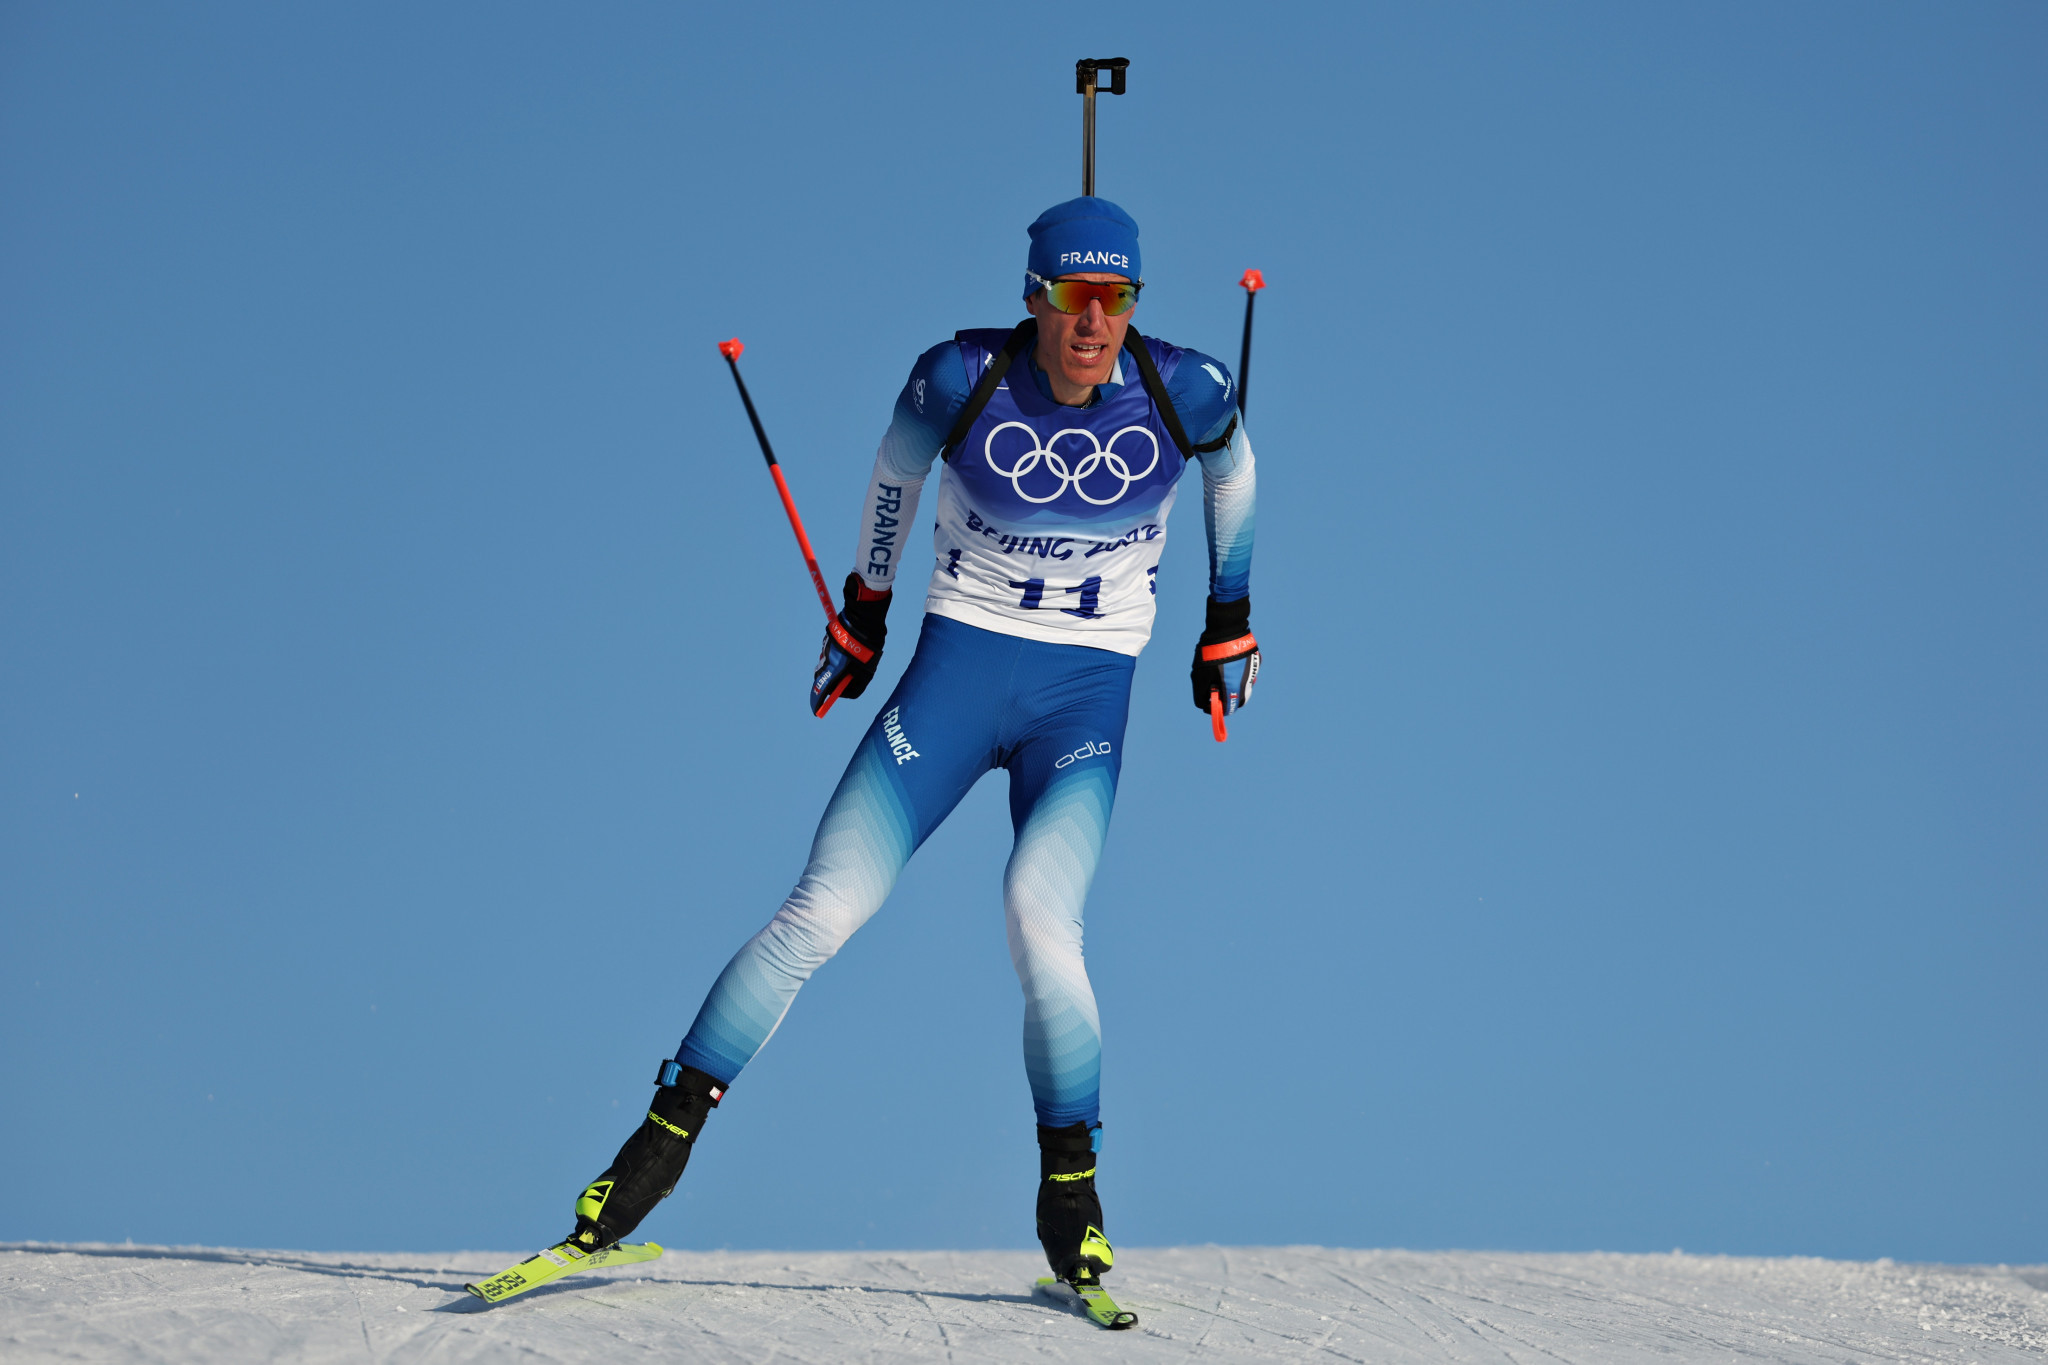 Quentin Fillon Maillet clinched France's first gold medal in the 20km biathlon race ©Getty Images